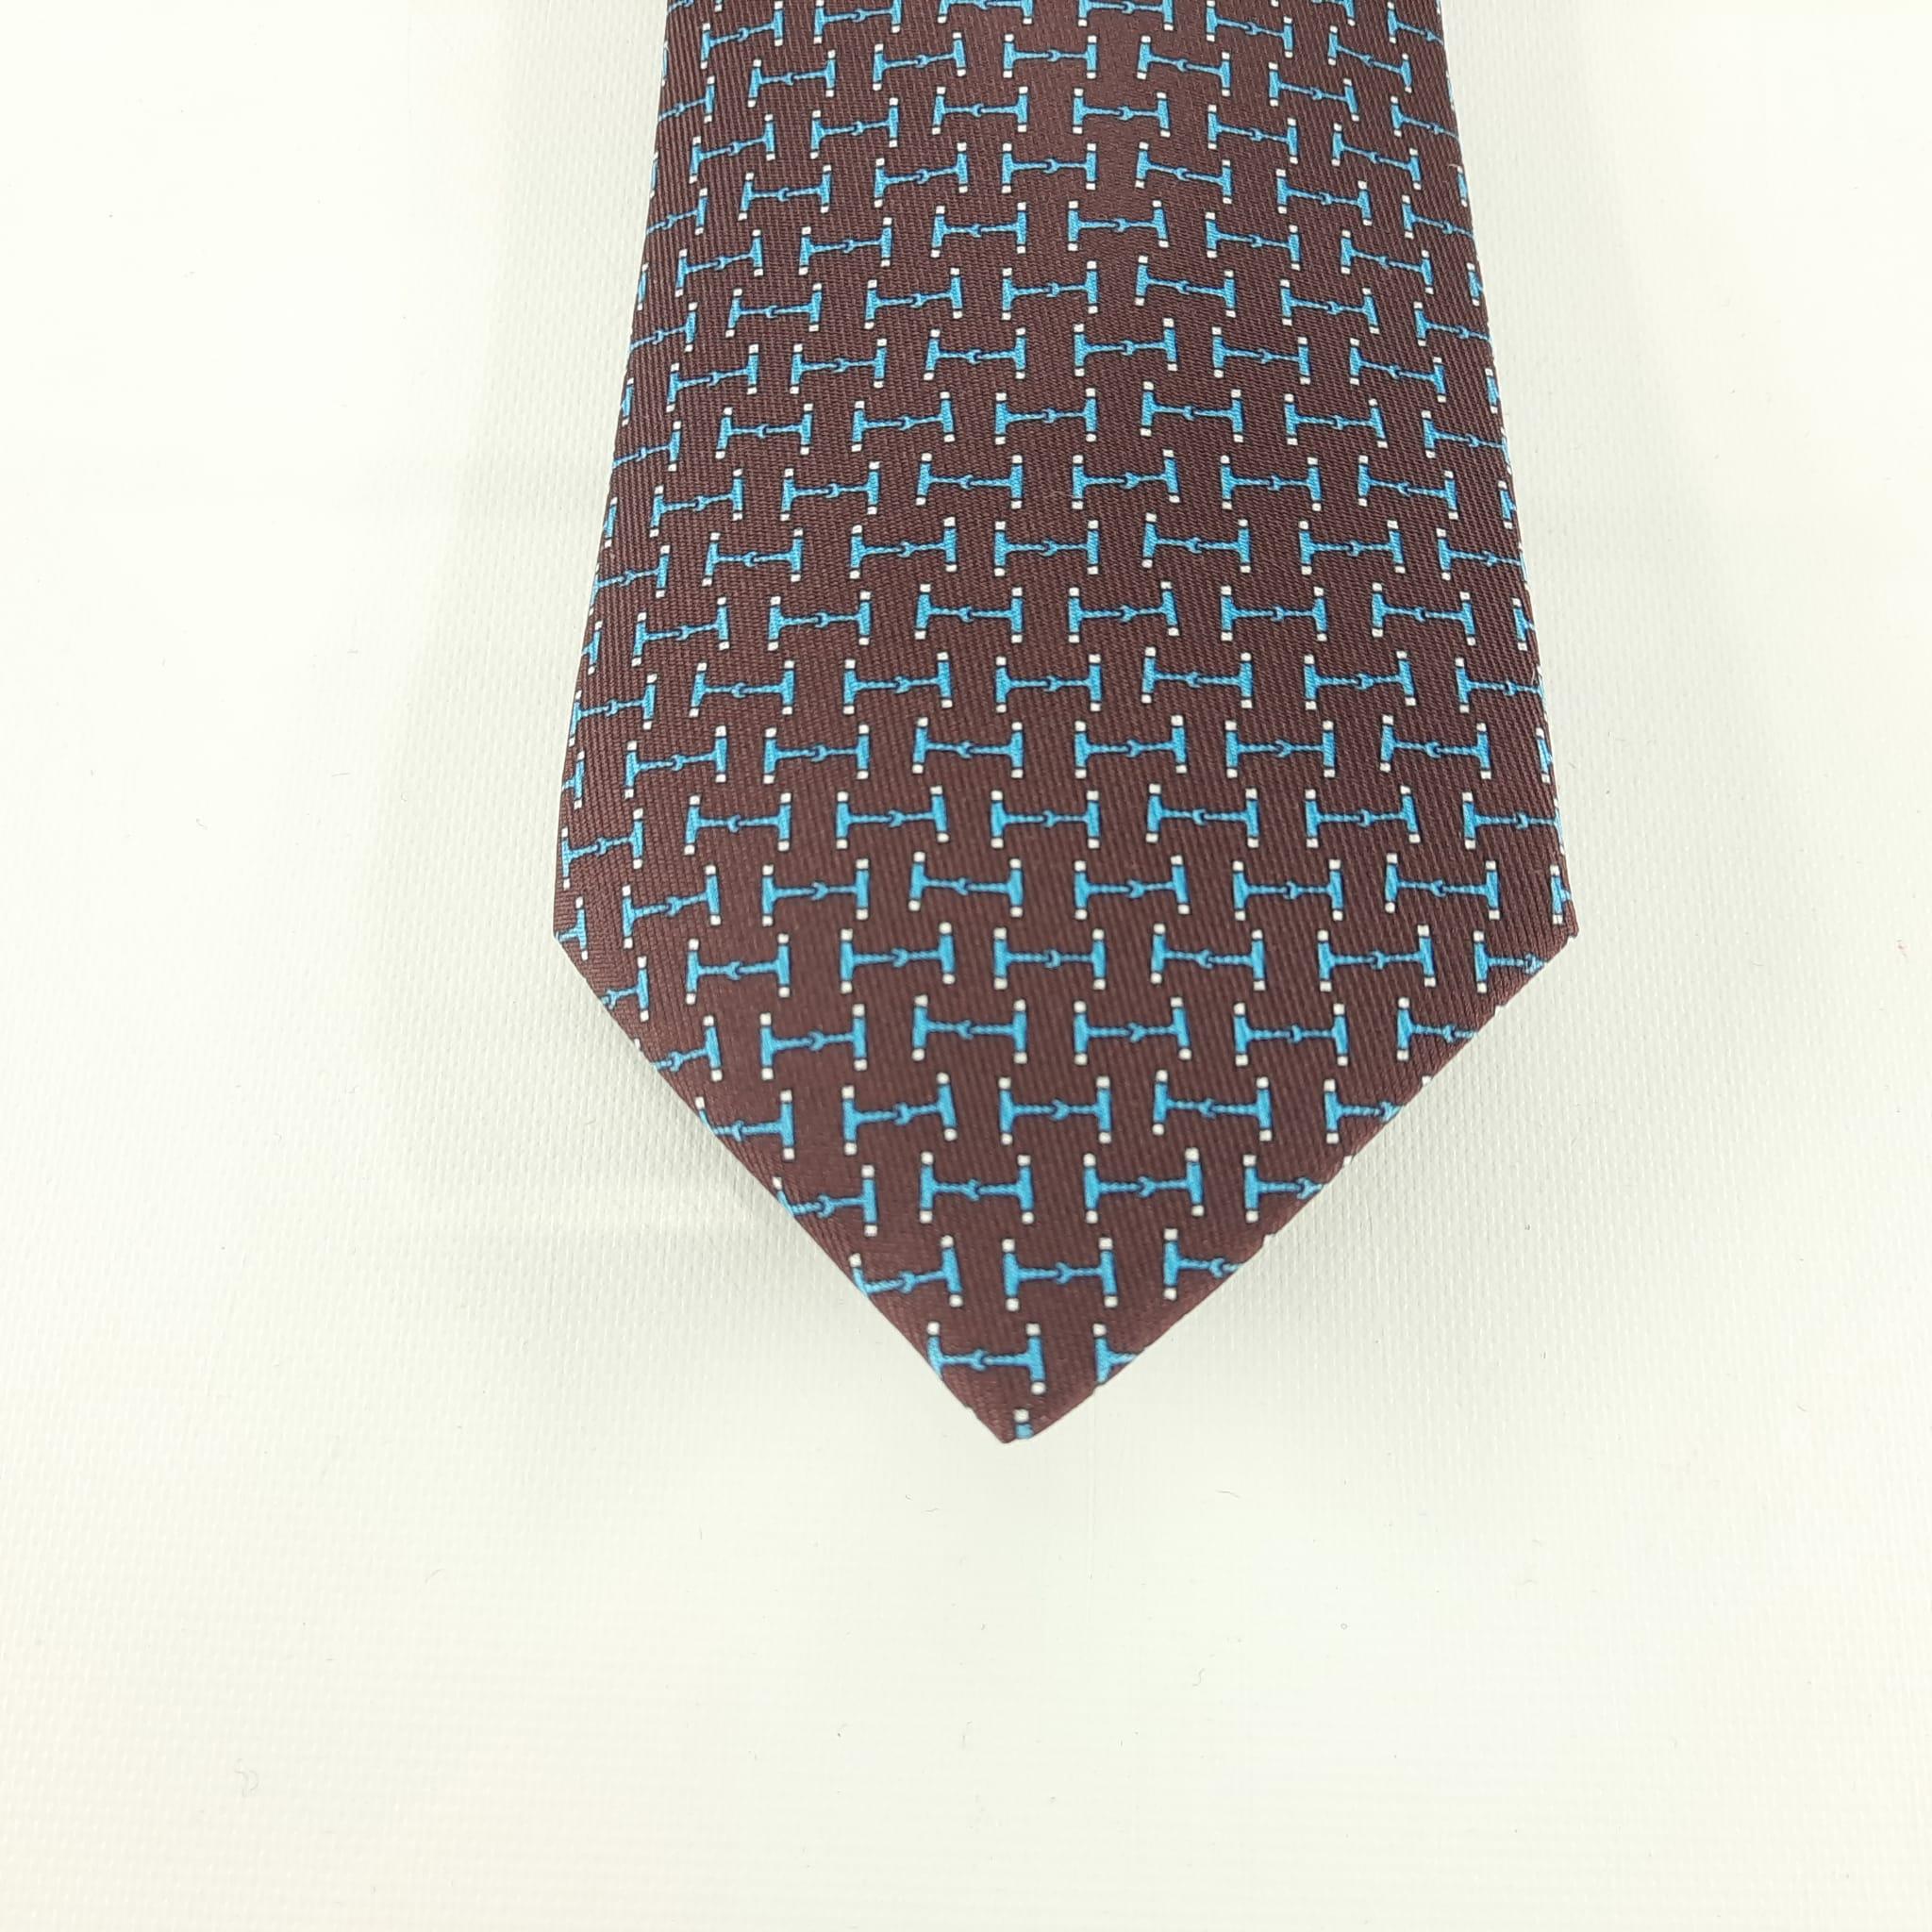 Hermes Bordeaux / Ciel / Blanc Dancing Bit tie In New Condition For Sale In Nicosia, CY